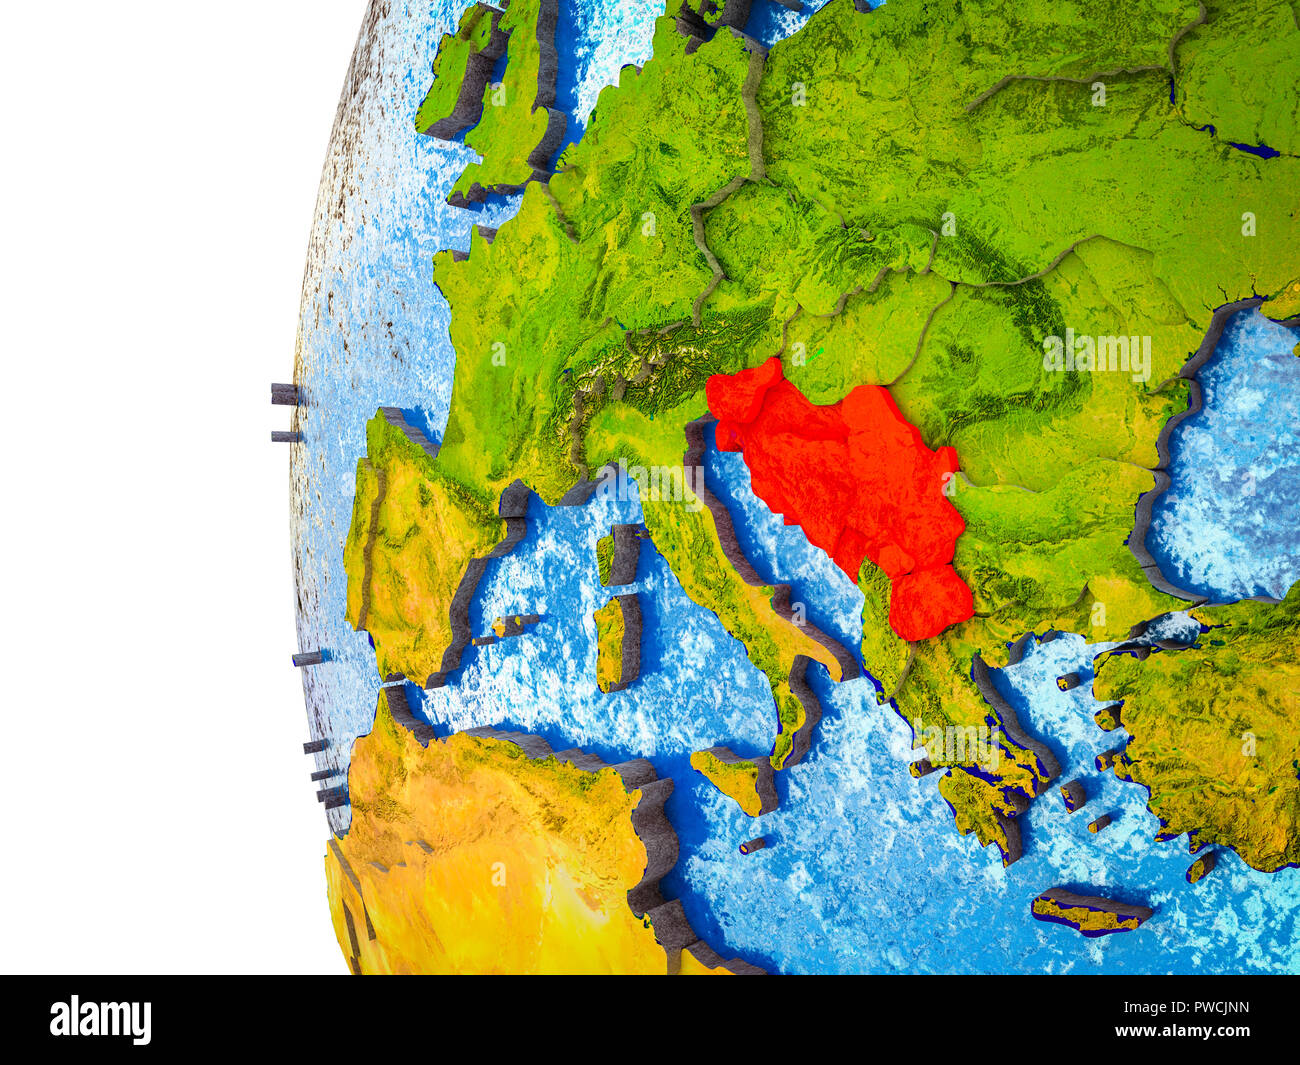 Former Yugoslavia Highlighted On 3d Earth With Visible Countries And Watery Oceans 3d Illustration Stock Photo Alamy